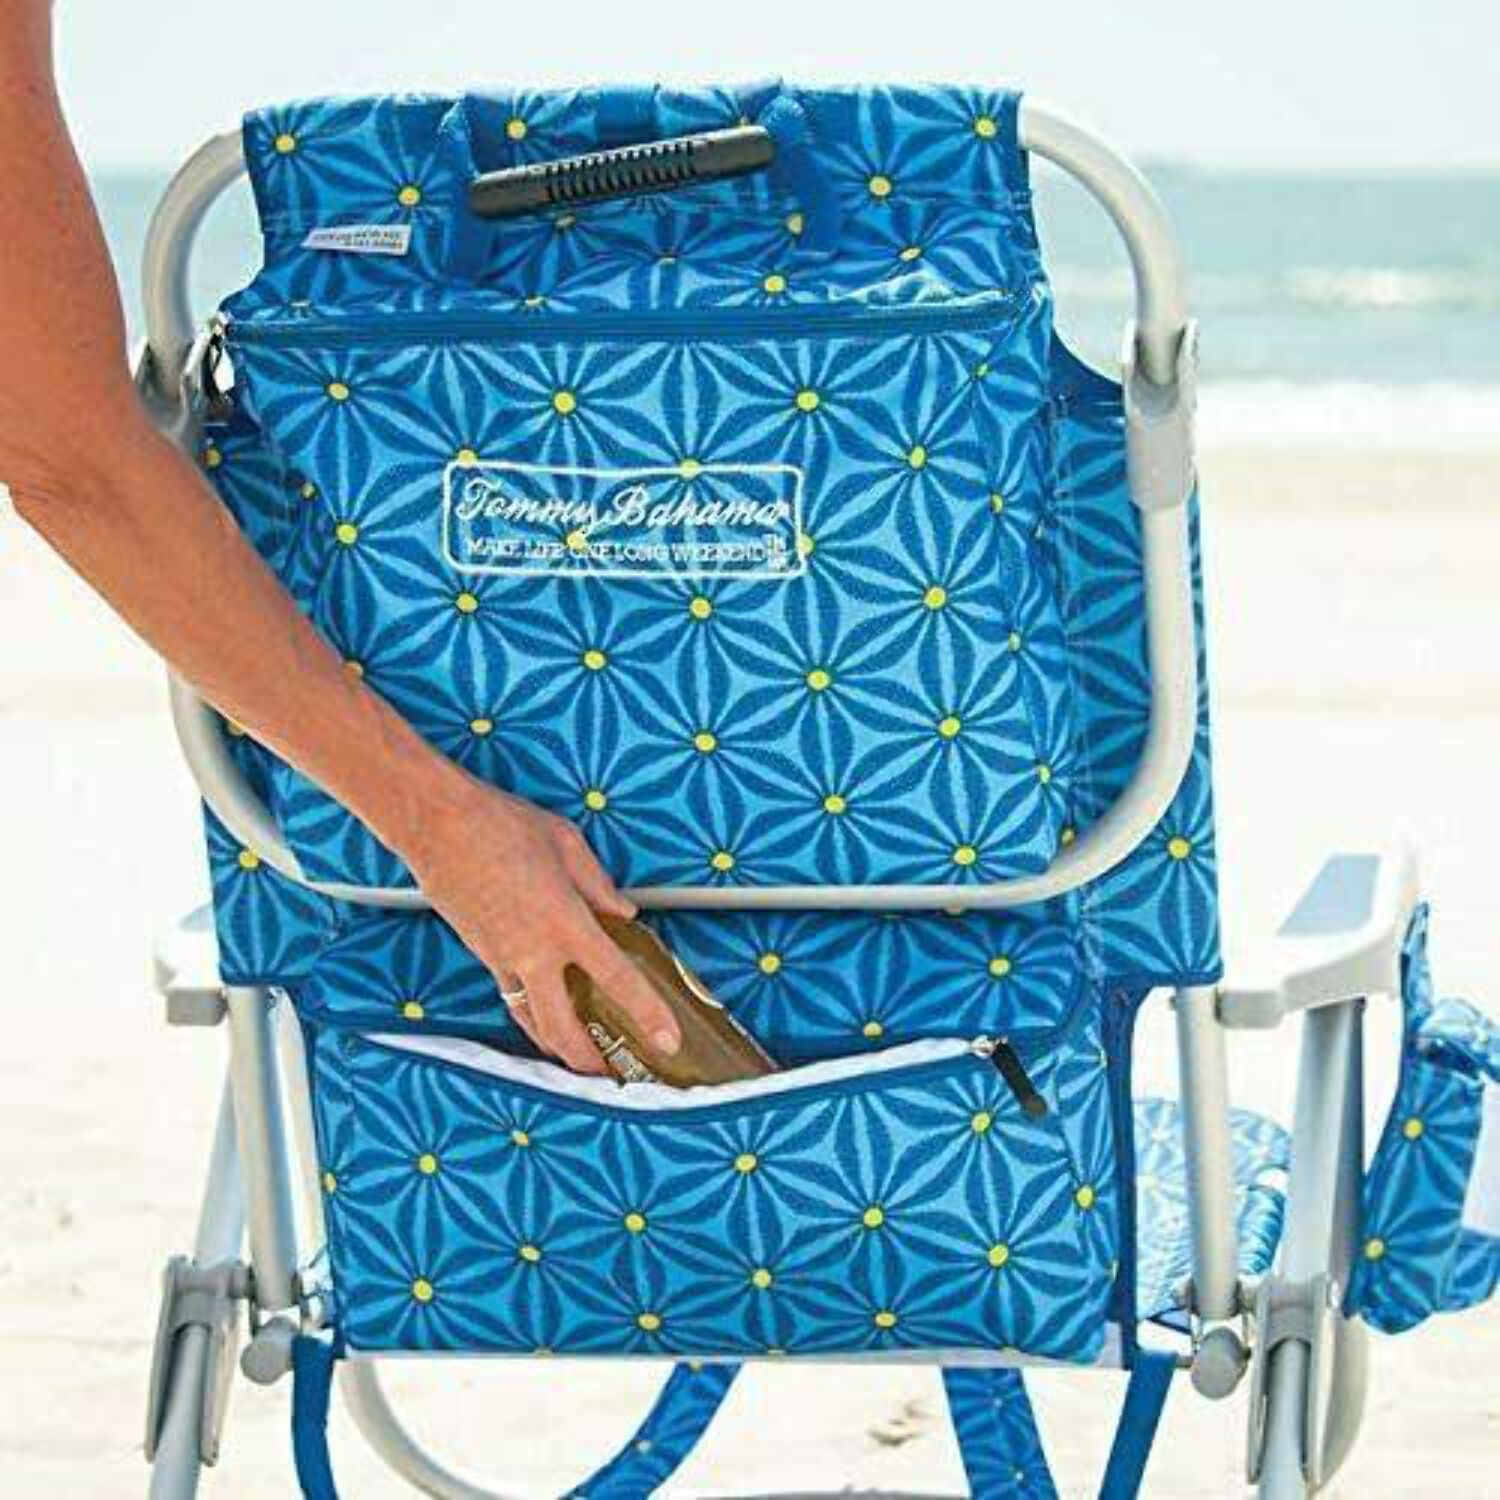 Tommy Bahama Backpack Beach Chair - image 3 of 10